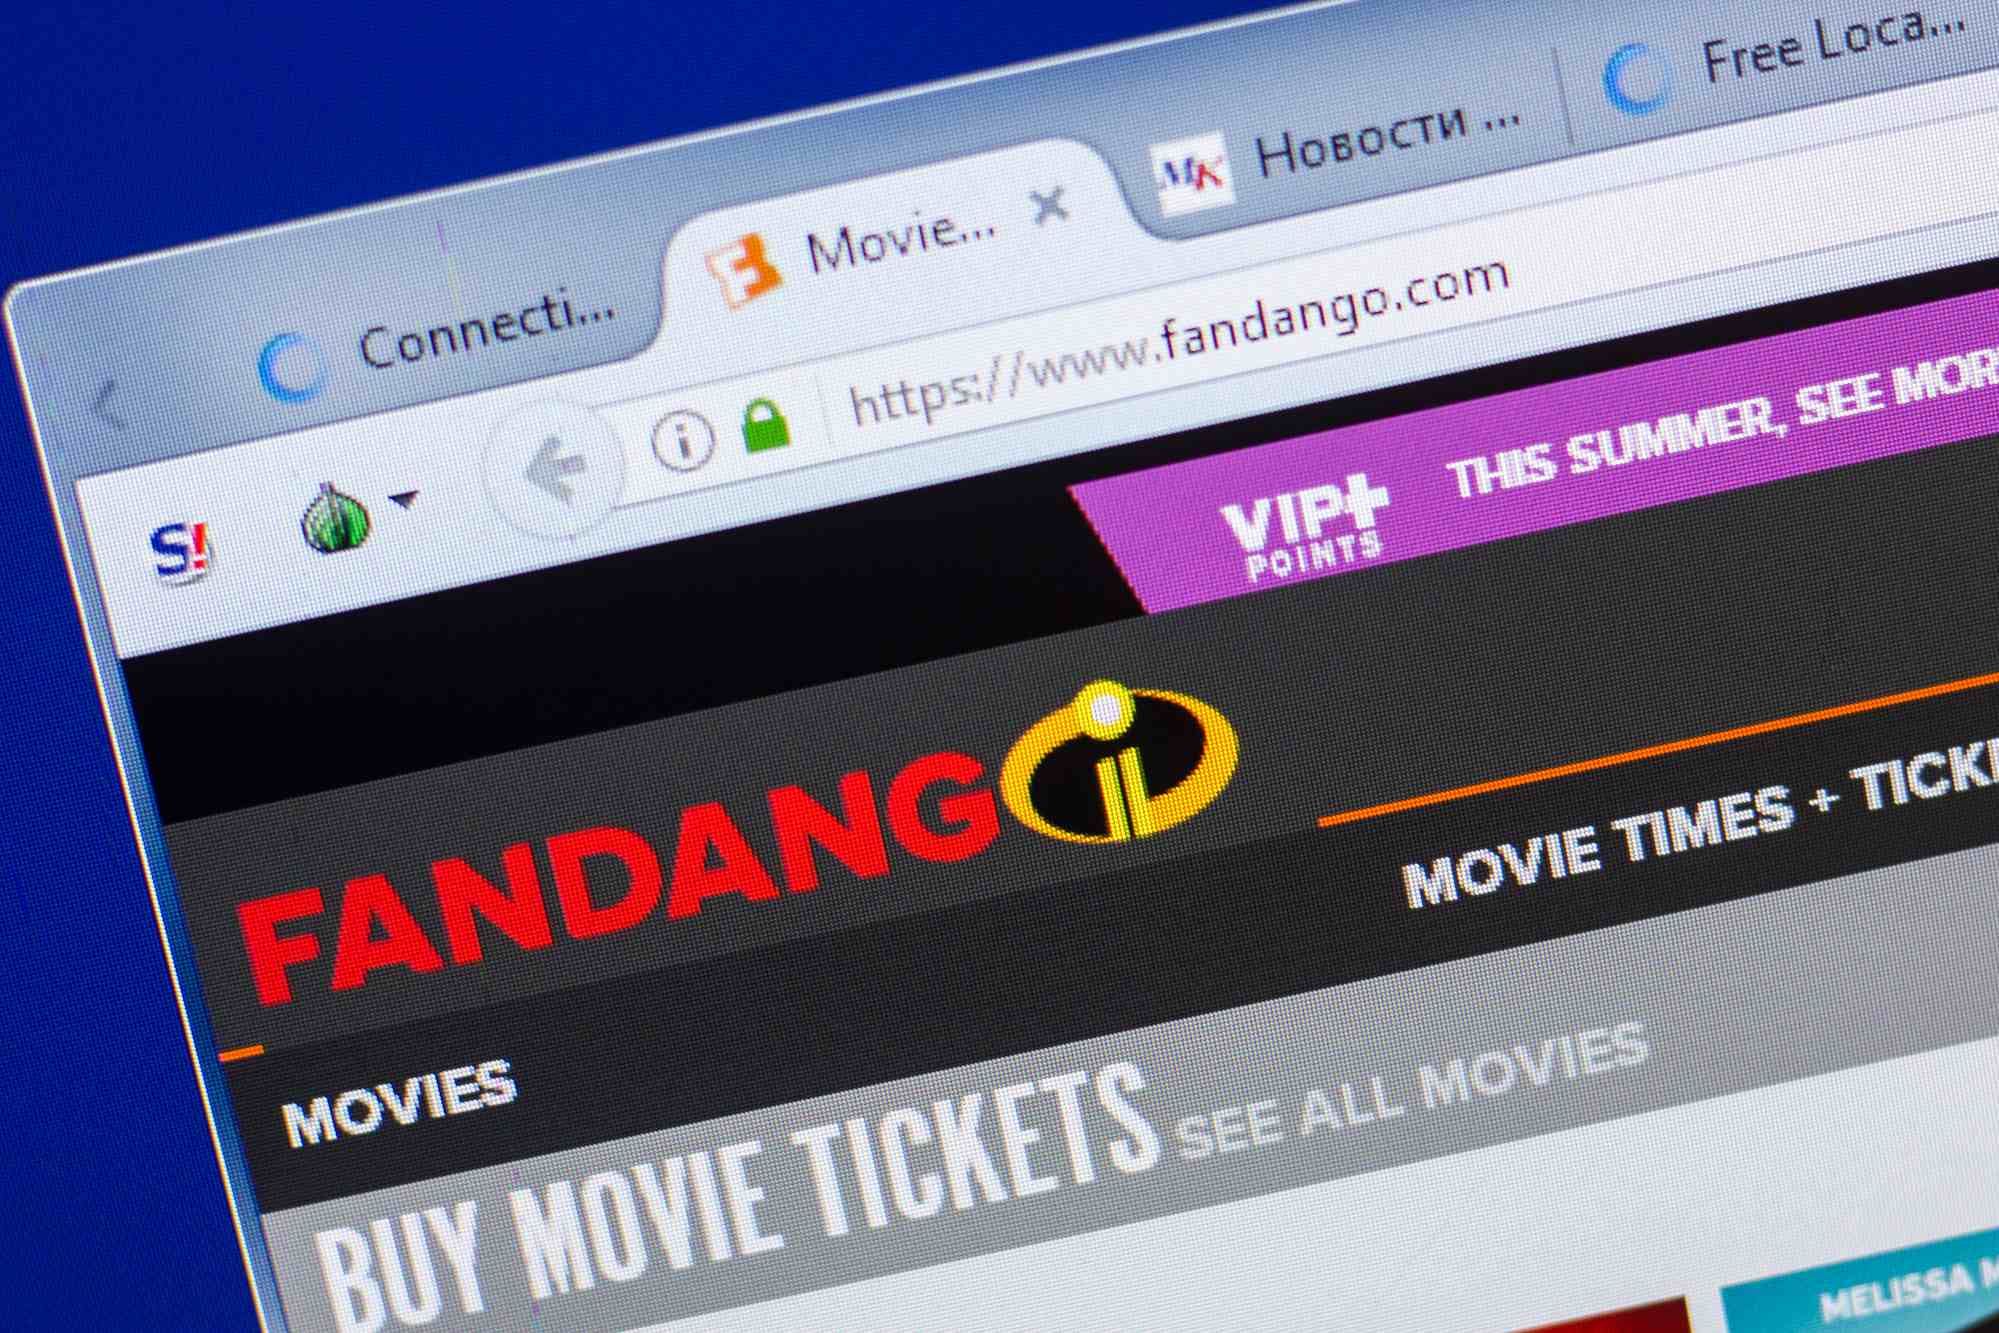 Fandango is facing a class action lawsuit over allegedly monitoring customers.